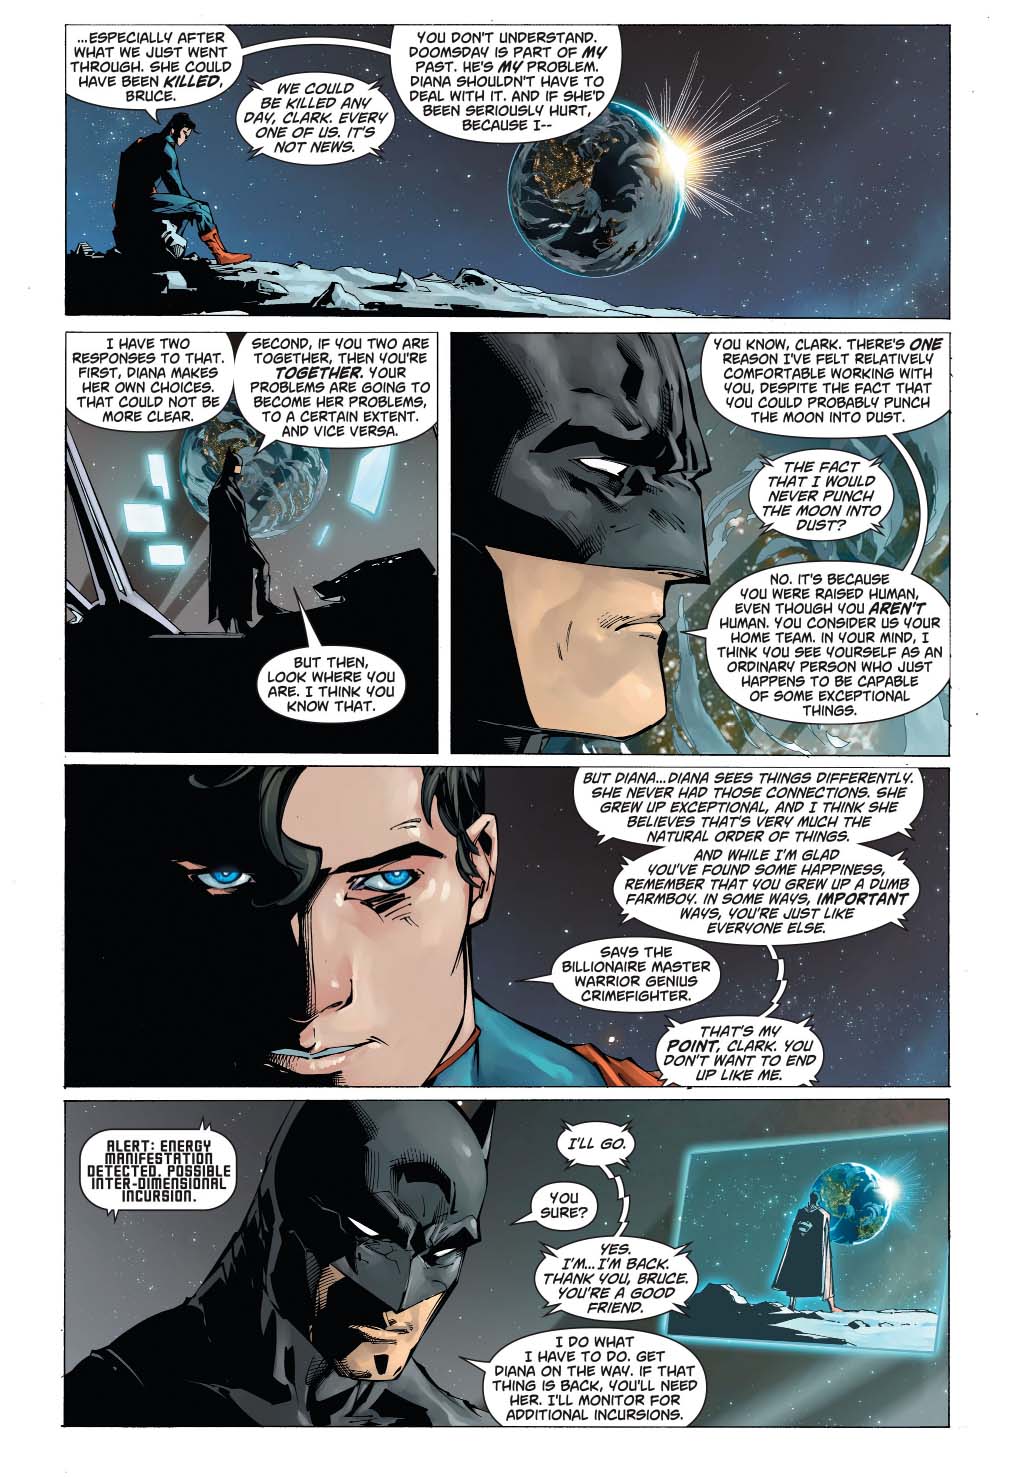 why batman is comfortable working with superman